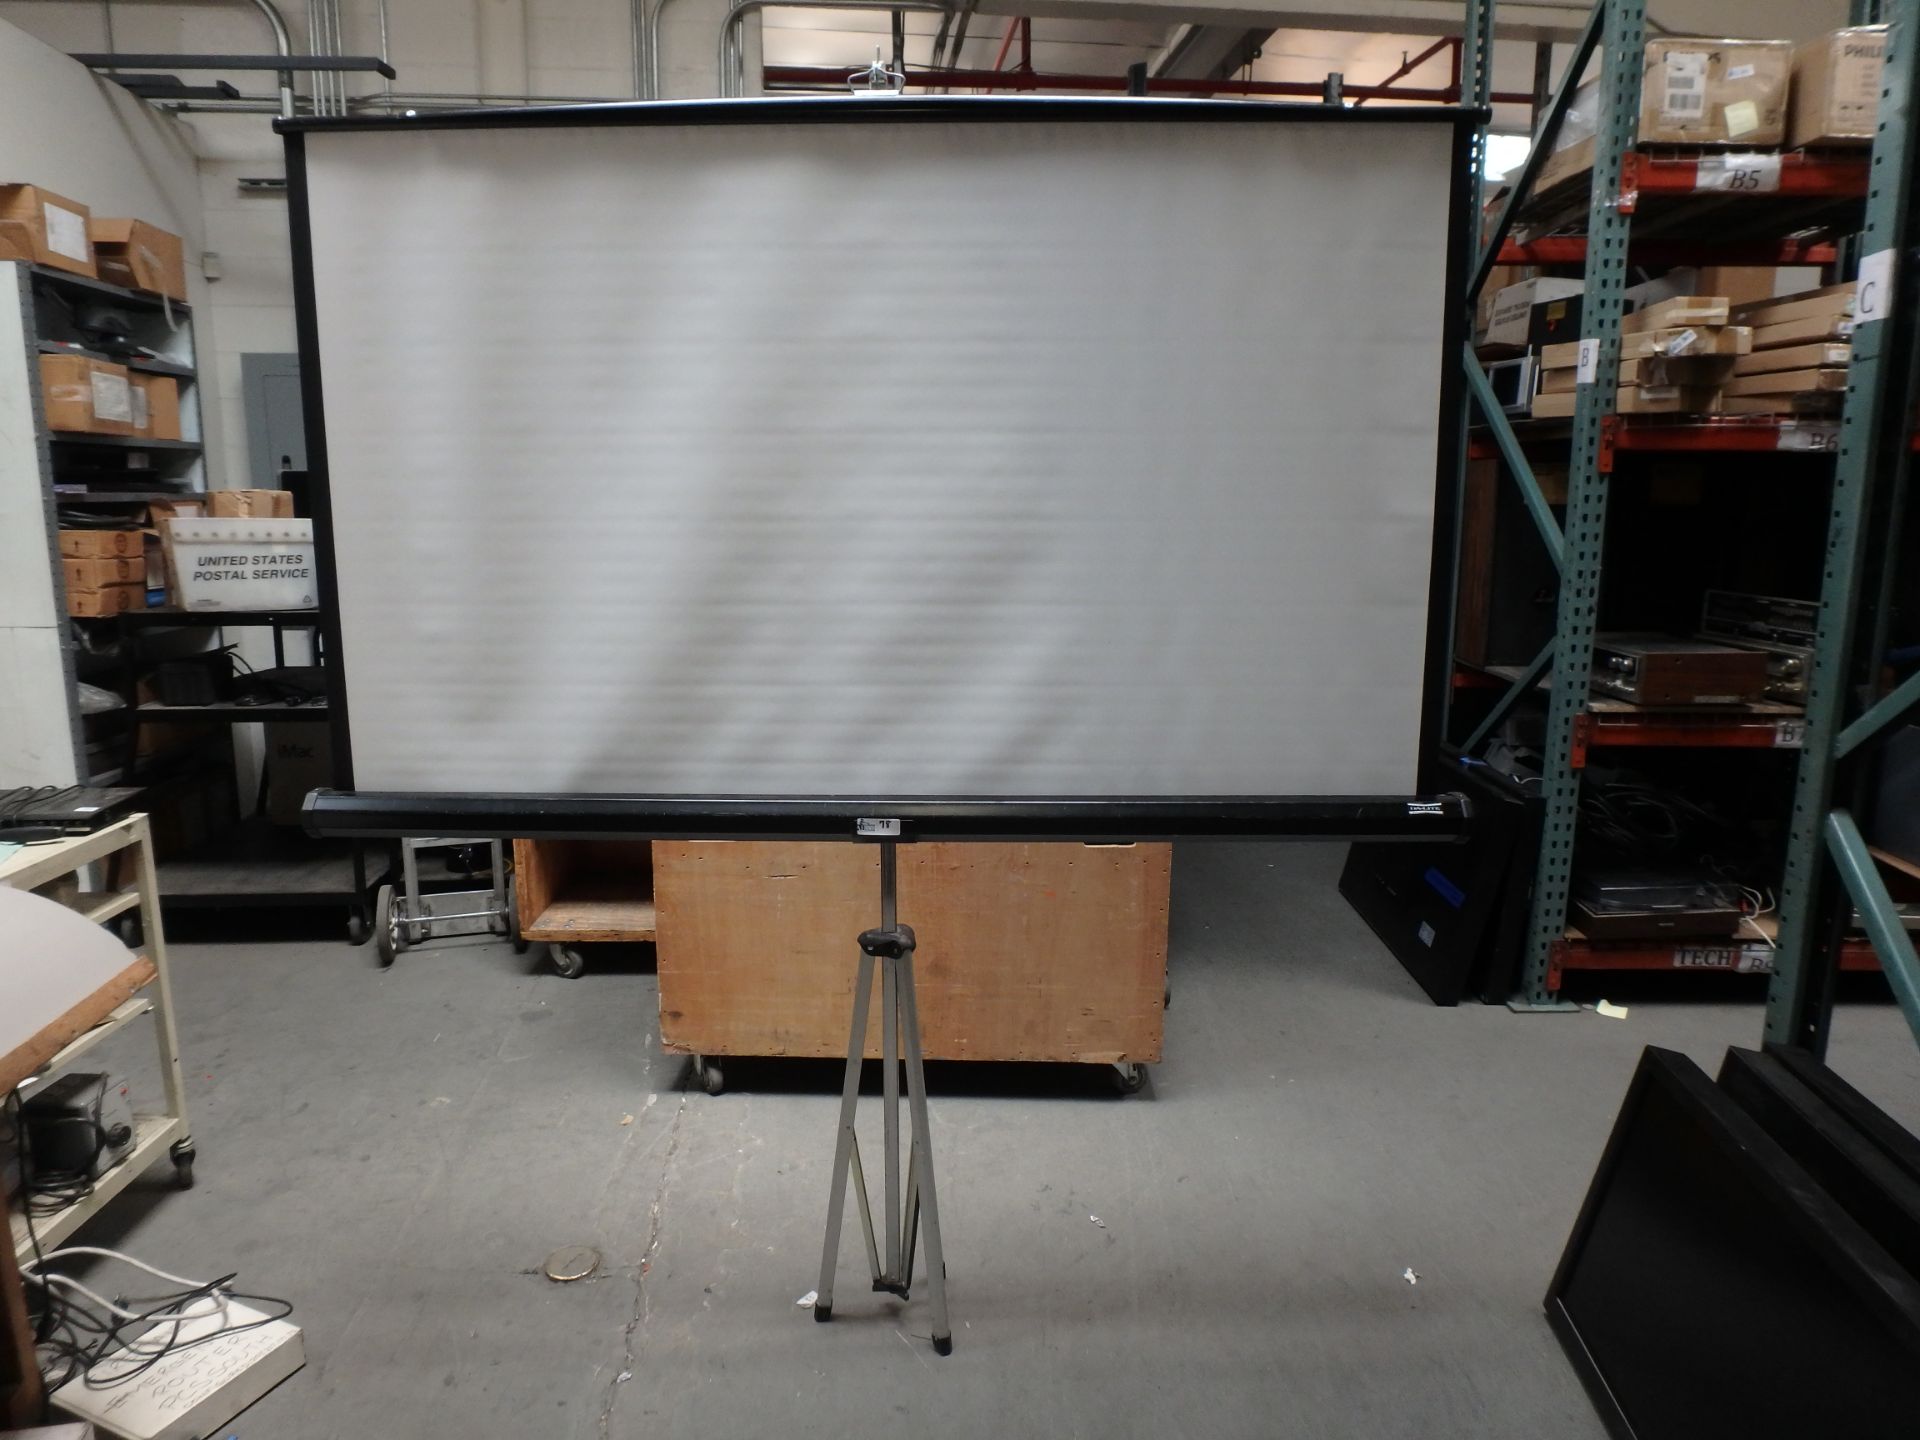 LOT OF 2 PORTABLE PROJECTOR SCREENS - Image 2 of 2